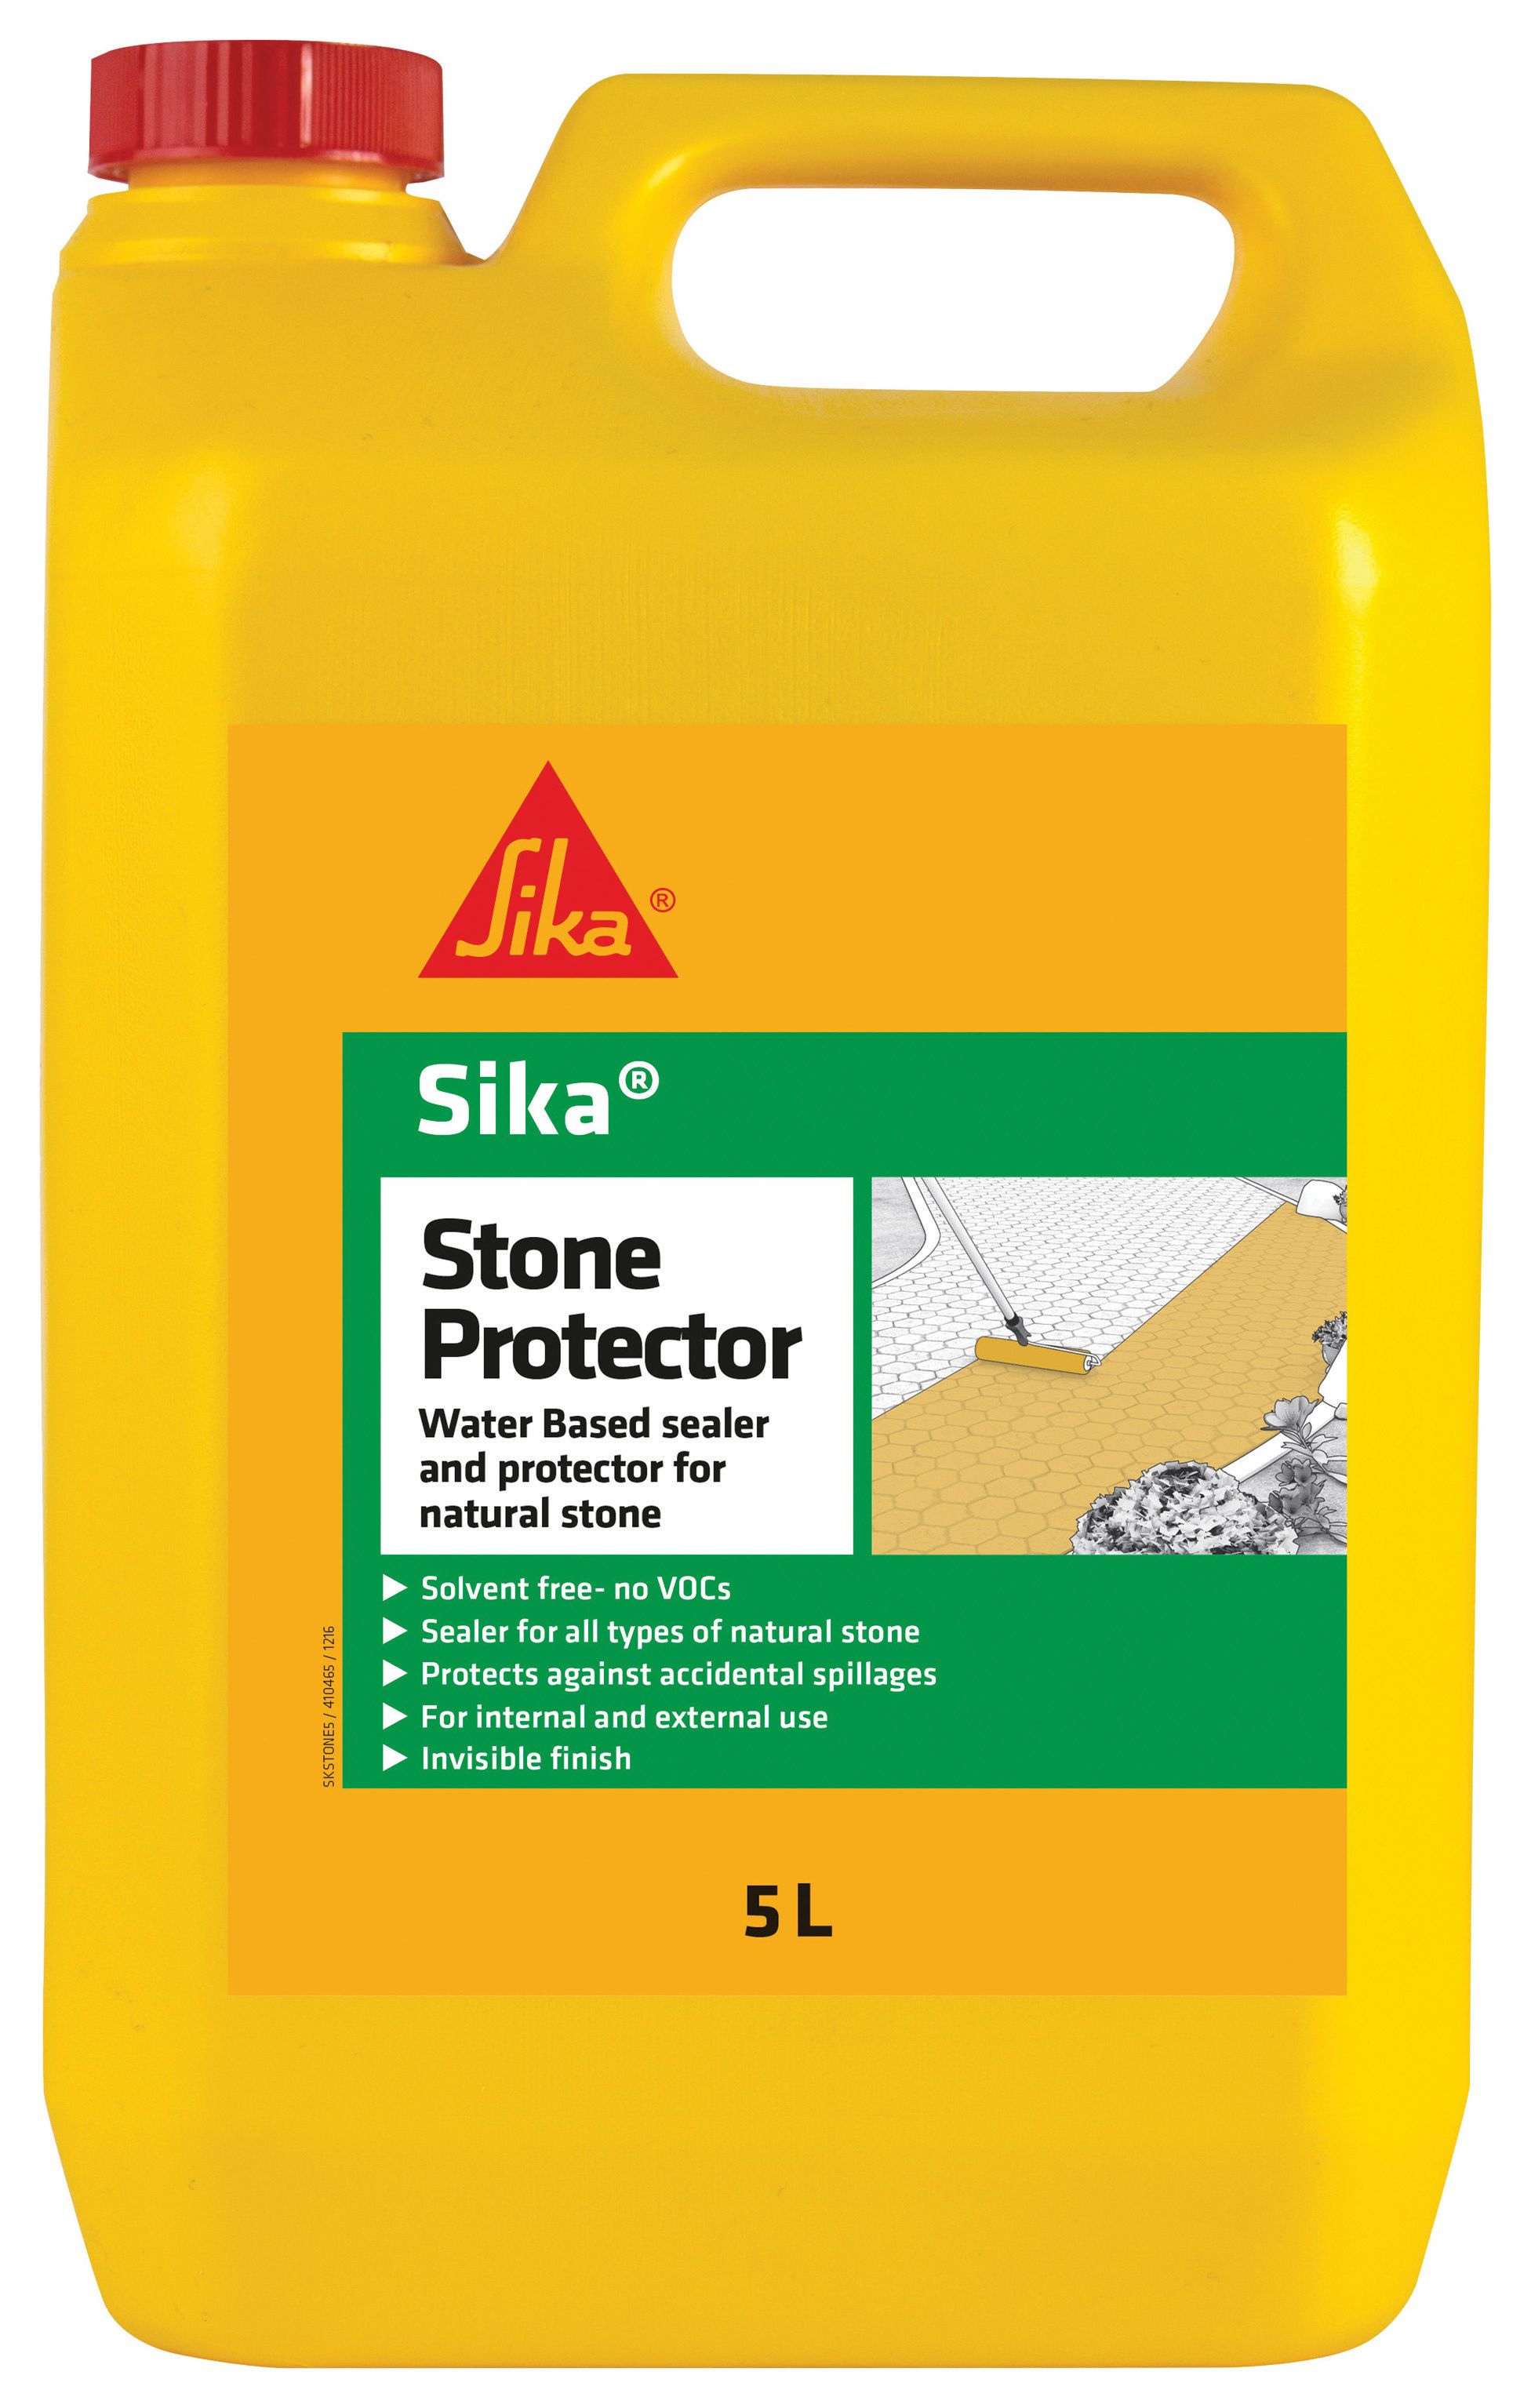 Sika Stone Protector for Natural Stone - 5L